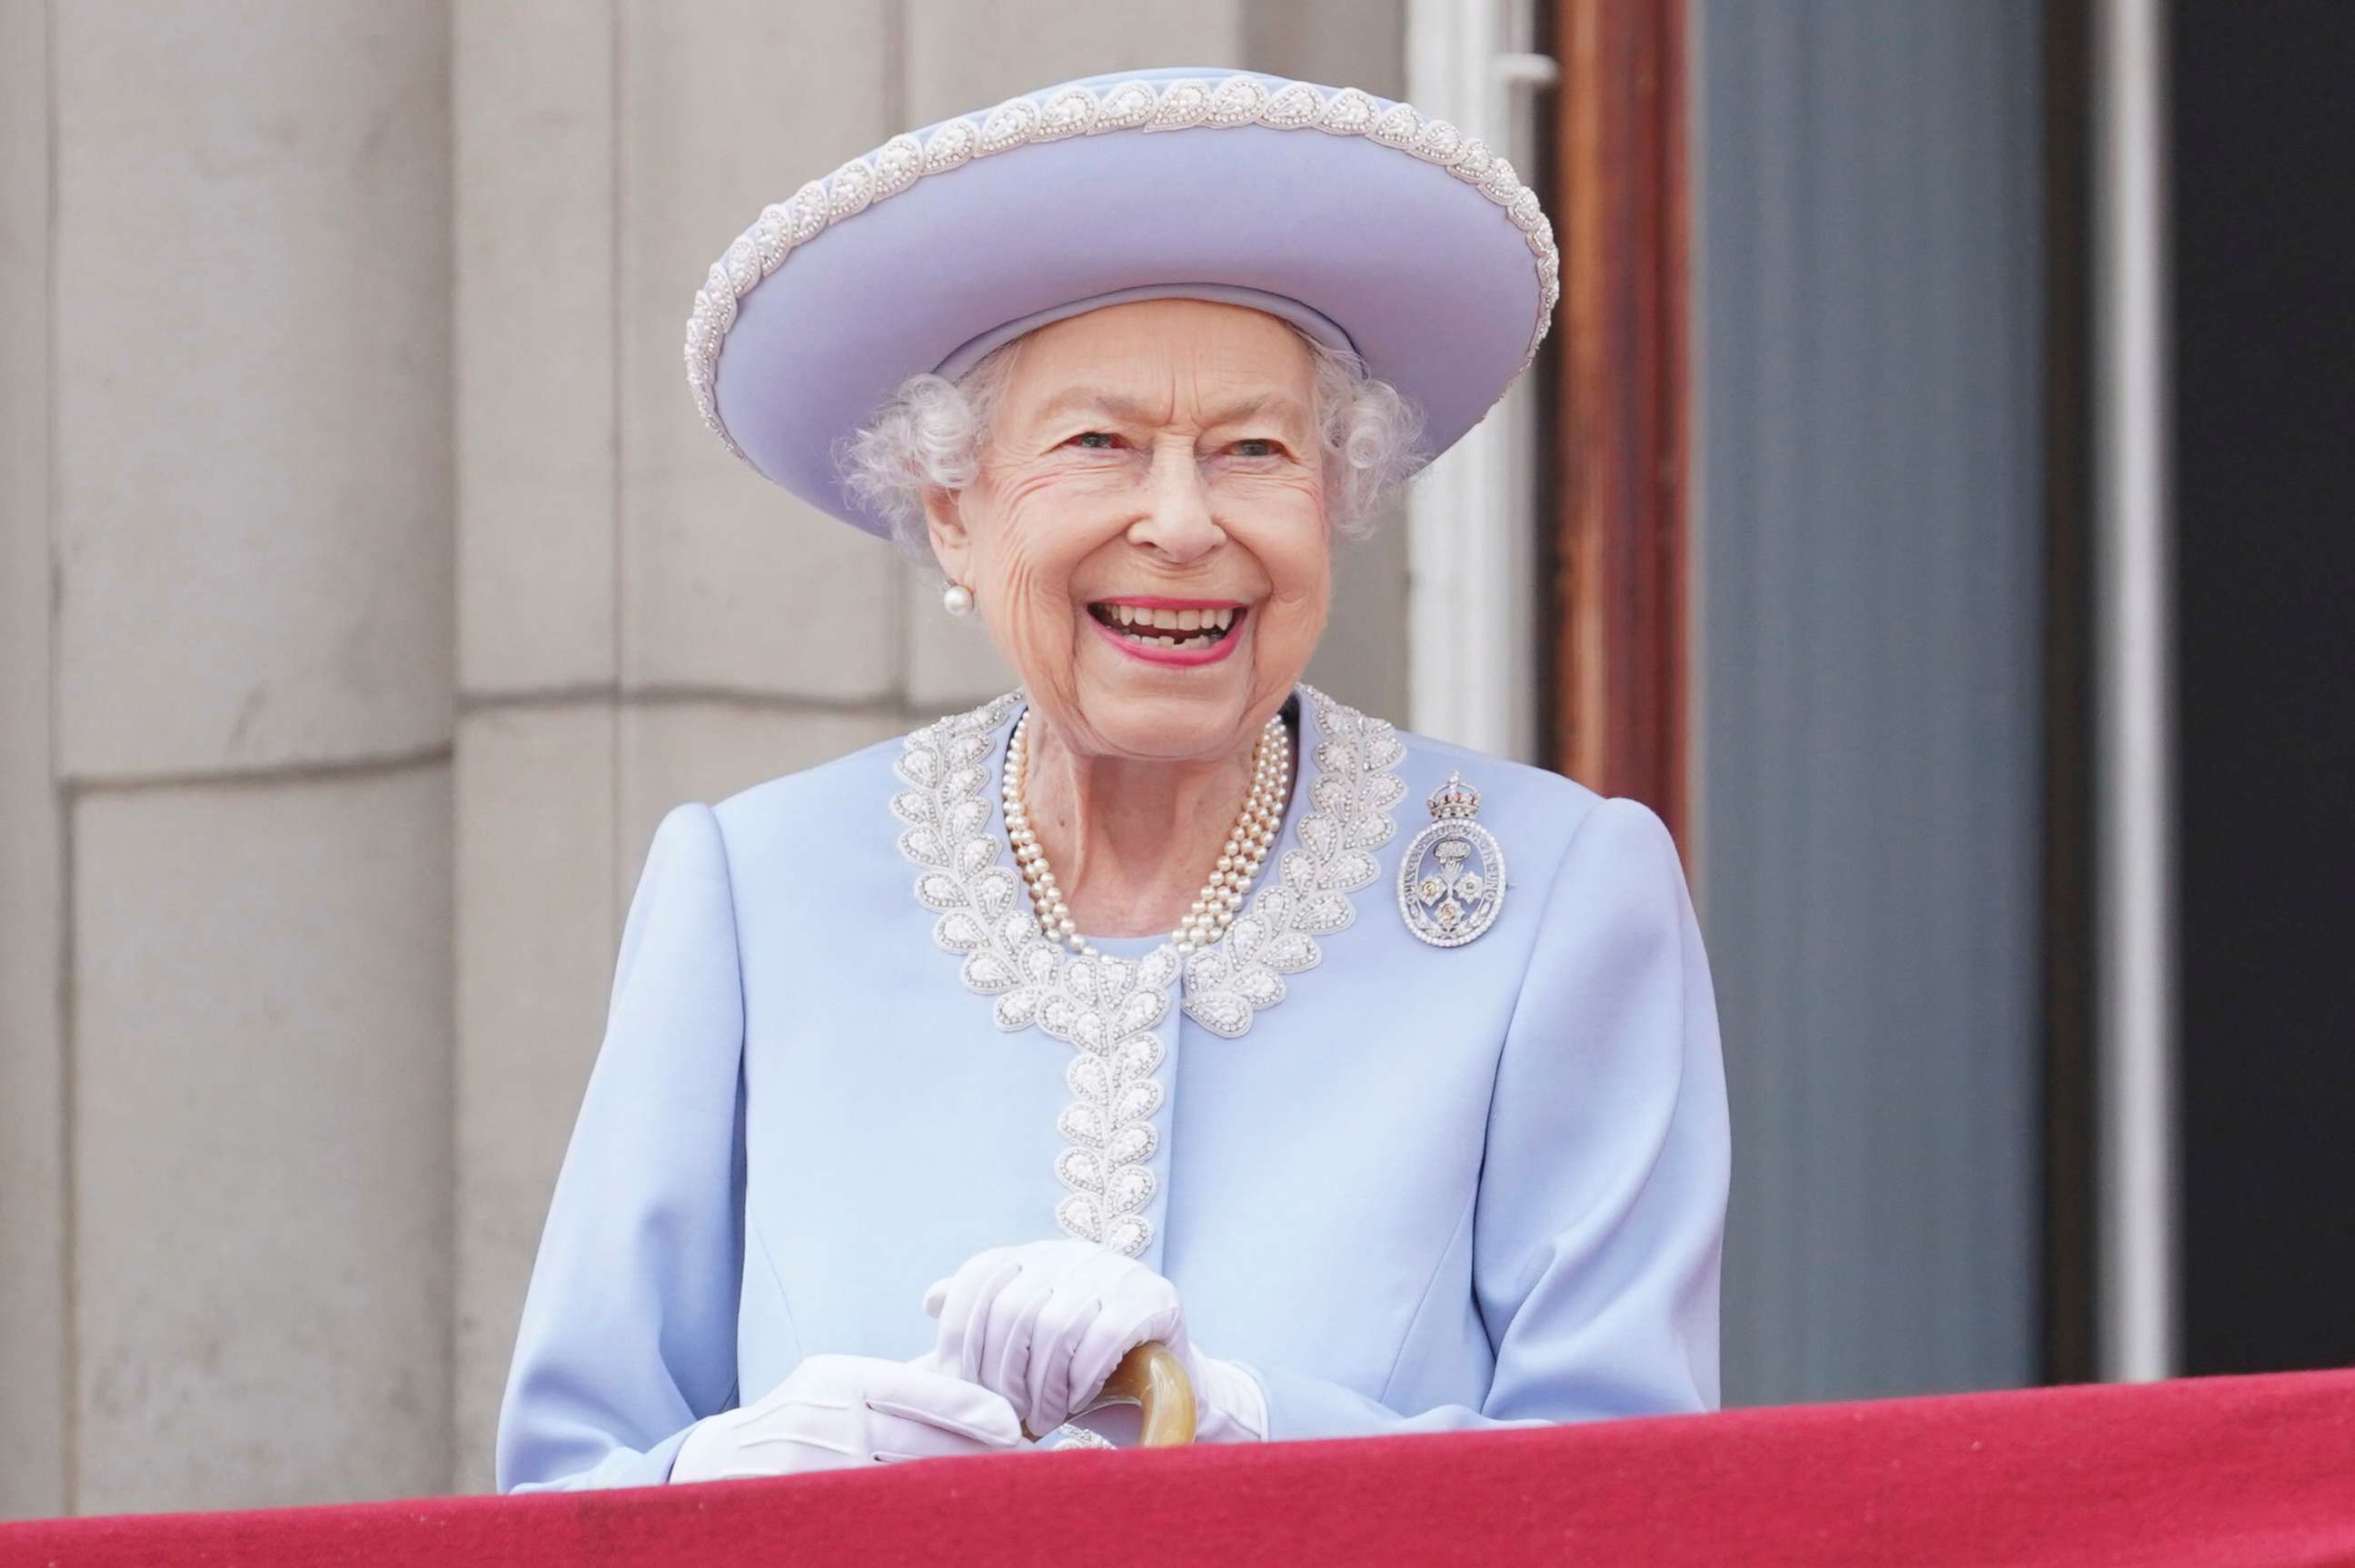 PHOTO: Queen Elizabeth II smiles as she watches from the balcony of Buckingham Palace after the Trooping the Color ceremony in London, June 2, 2022.